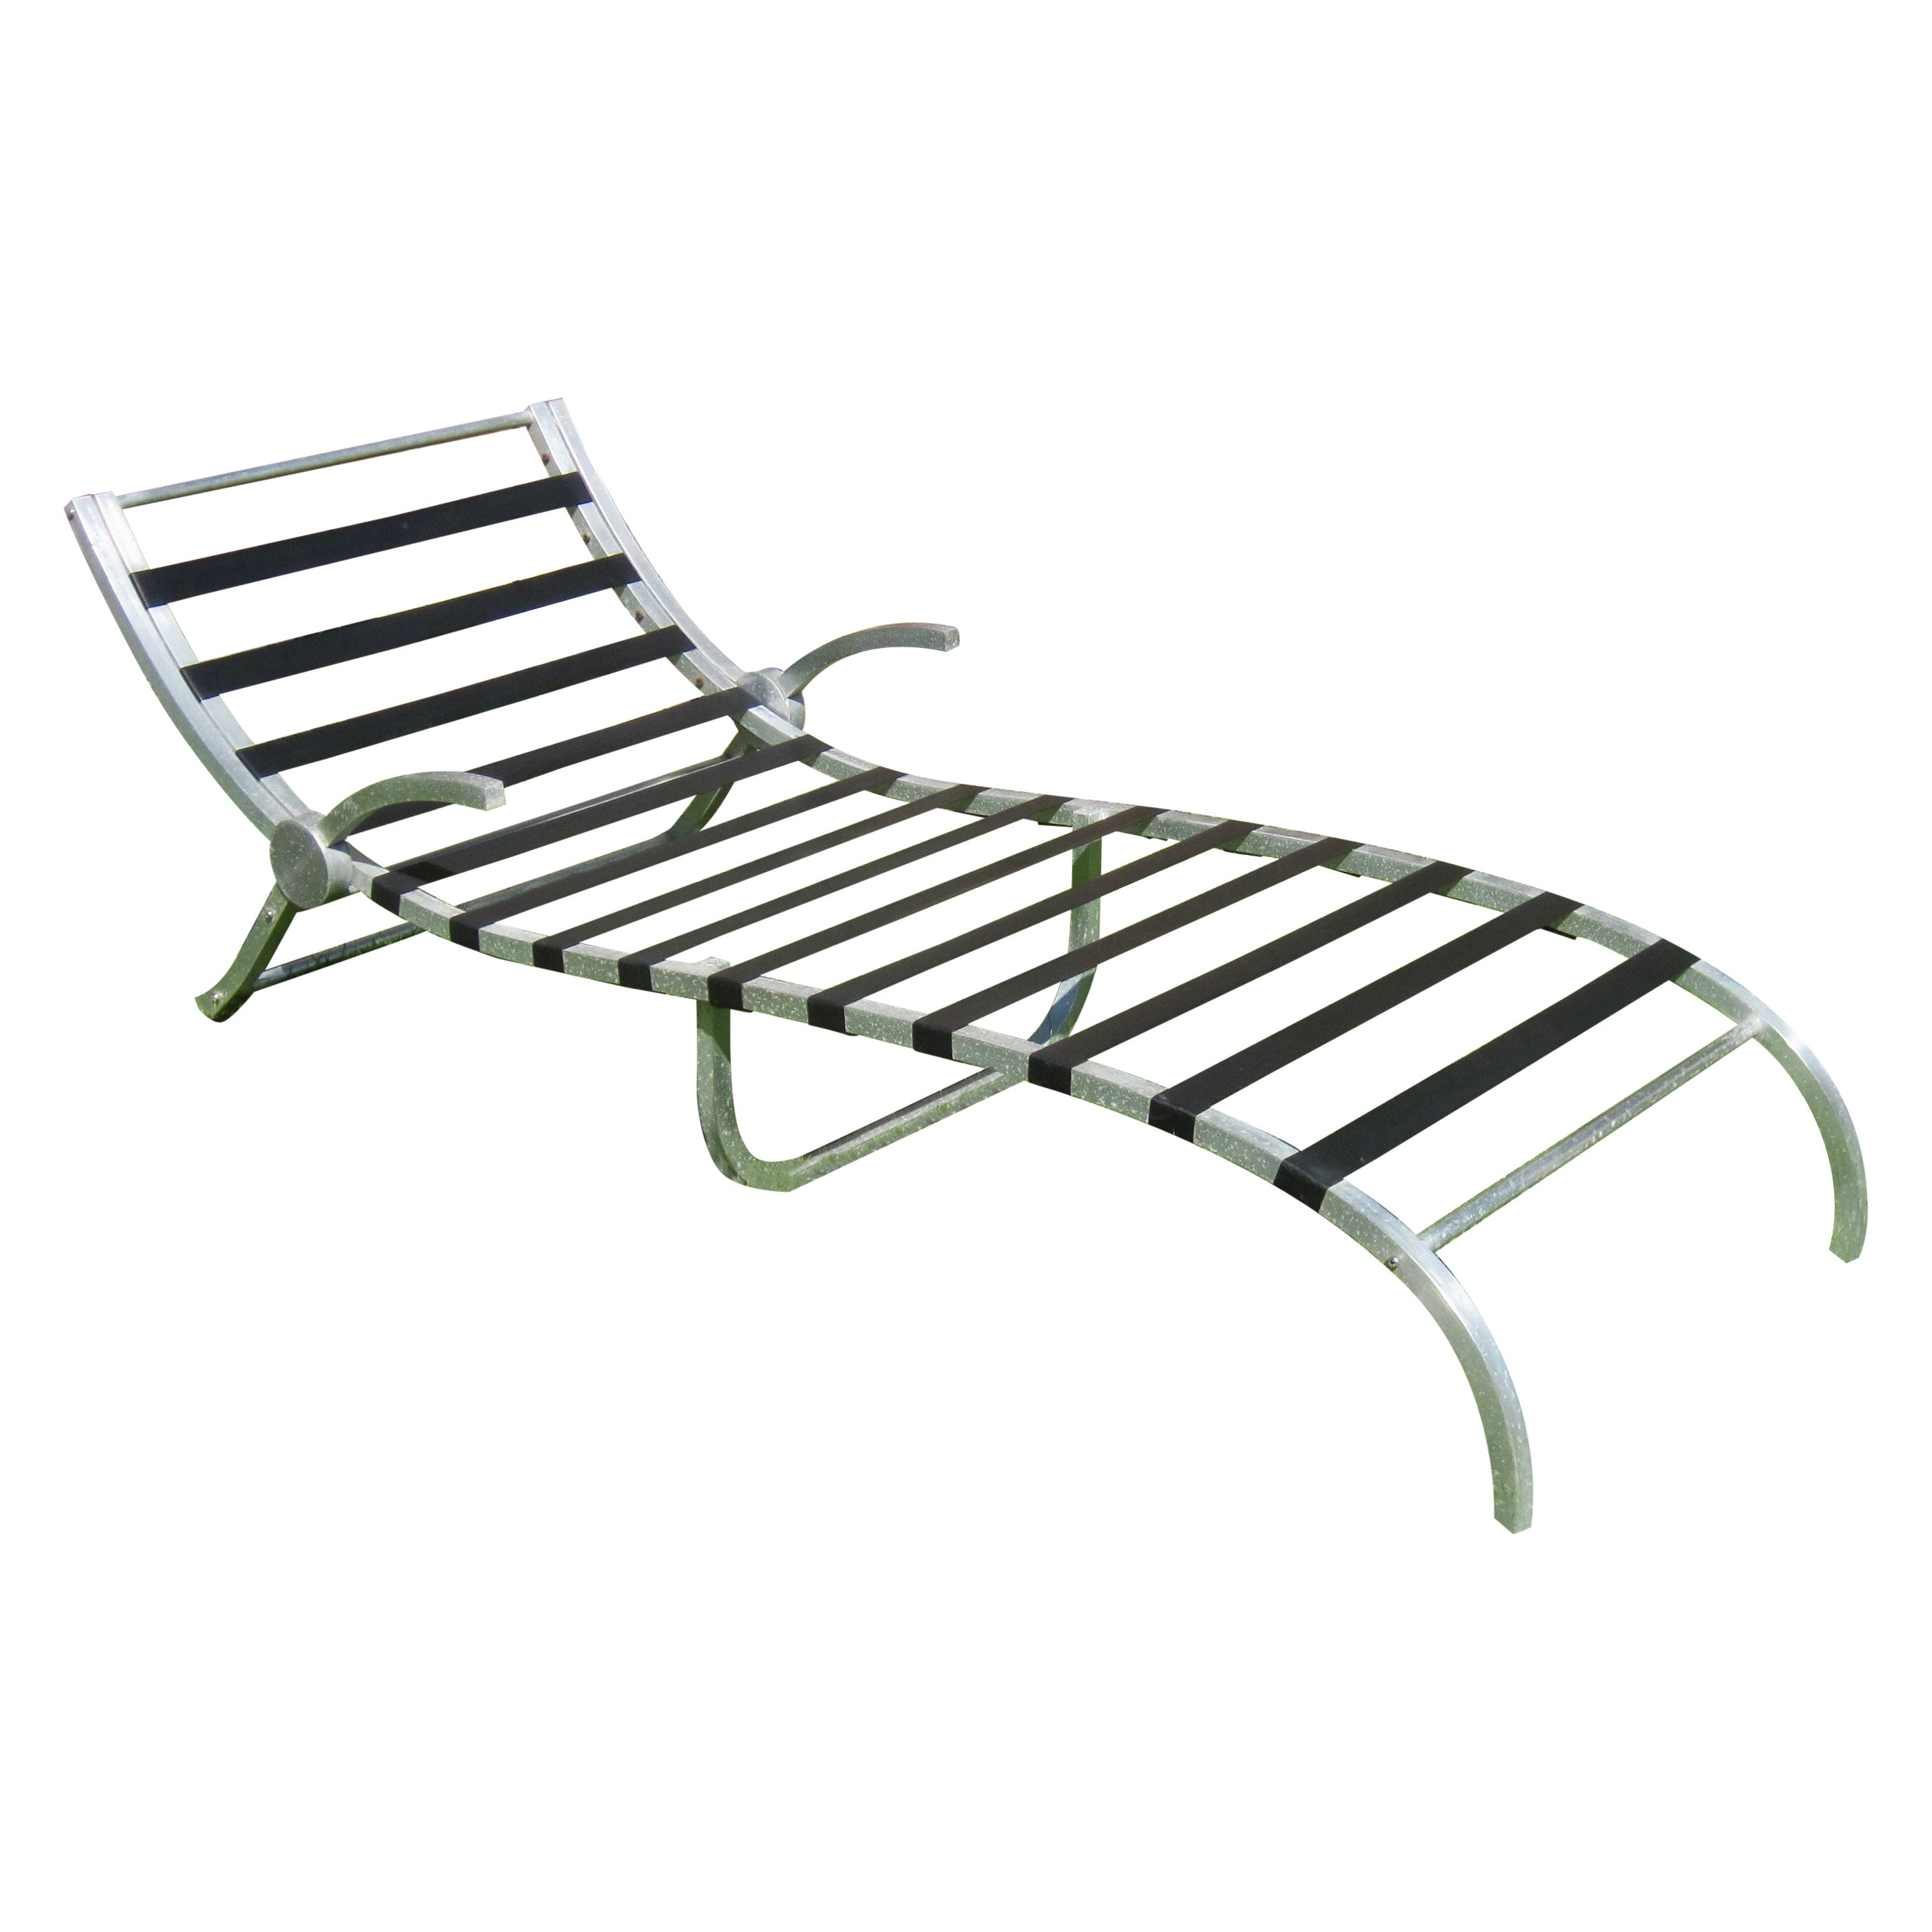 1960s Aluminum Framed Webbed Palm Springs Poolside Chaise Lounge For Sale